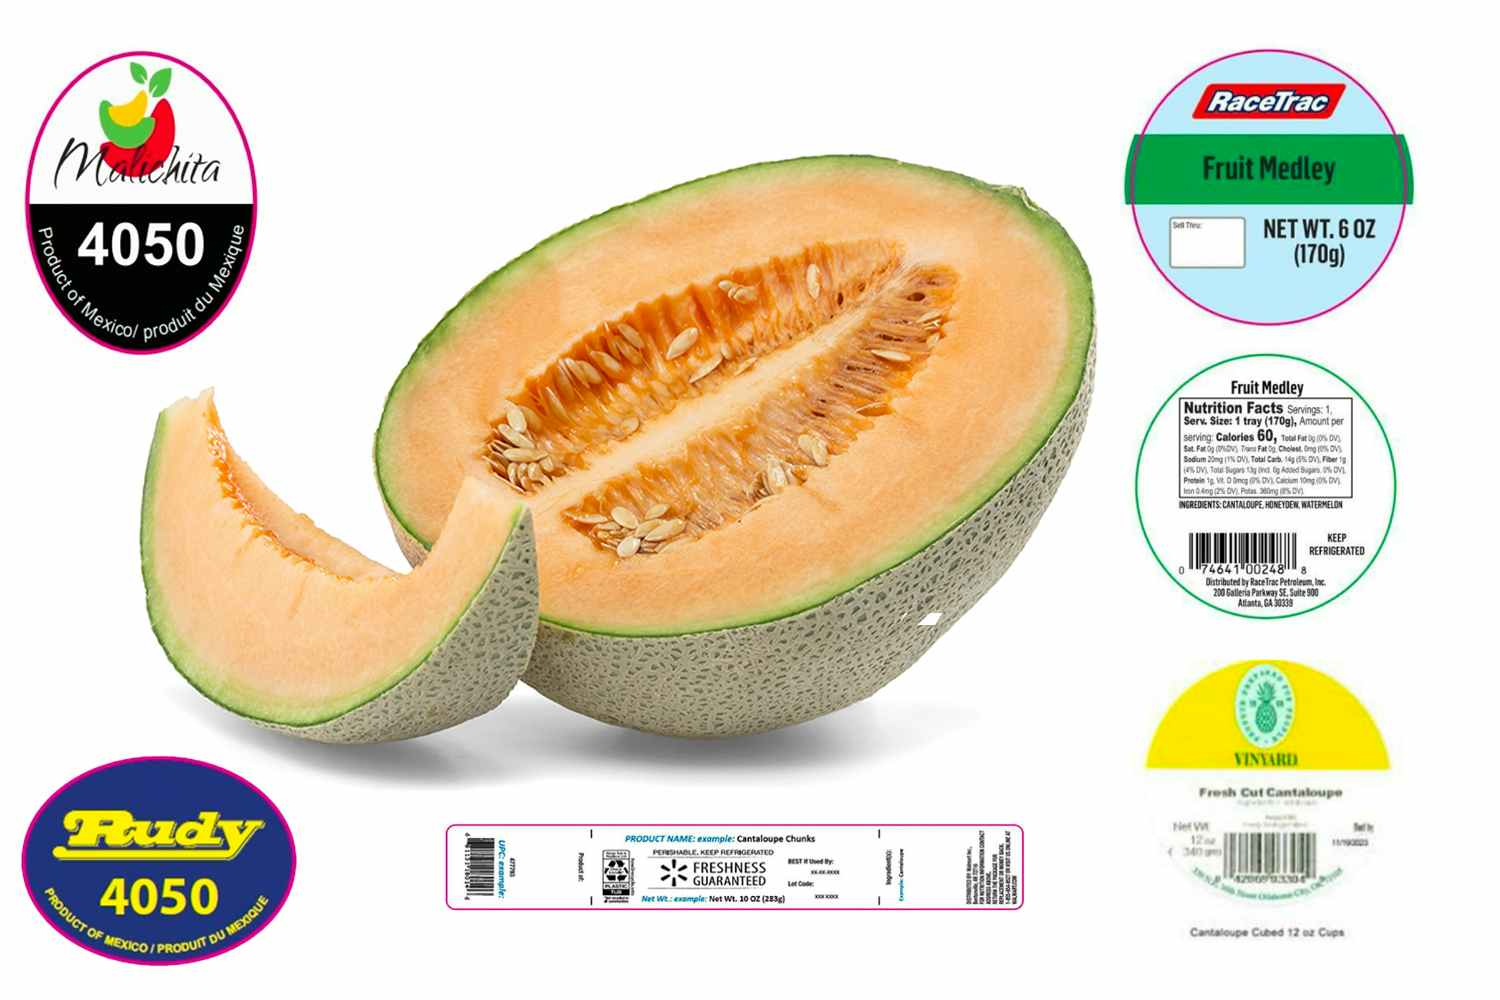 An image of a cantaloupe surrounded by graphics of the labels associated with products recalled in 2023 due to Salmonella concerns.